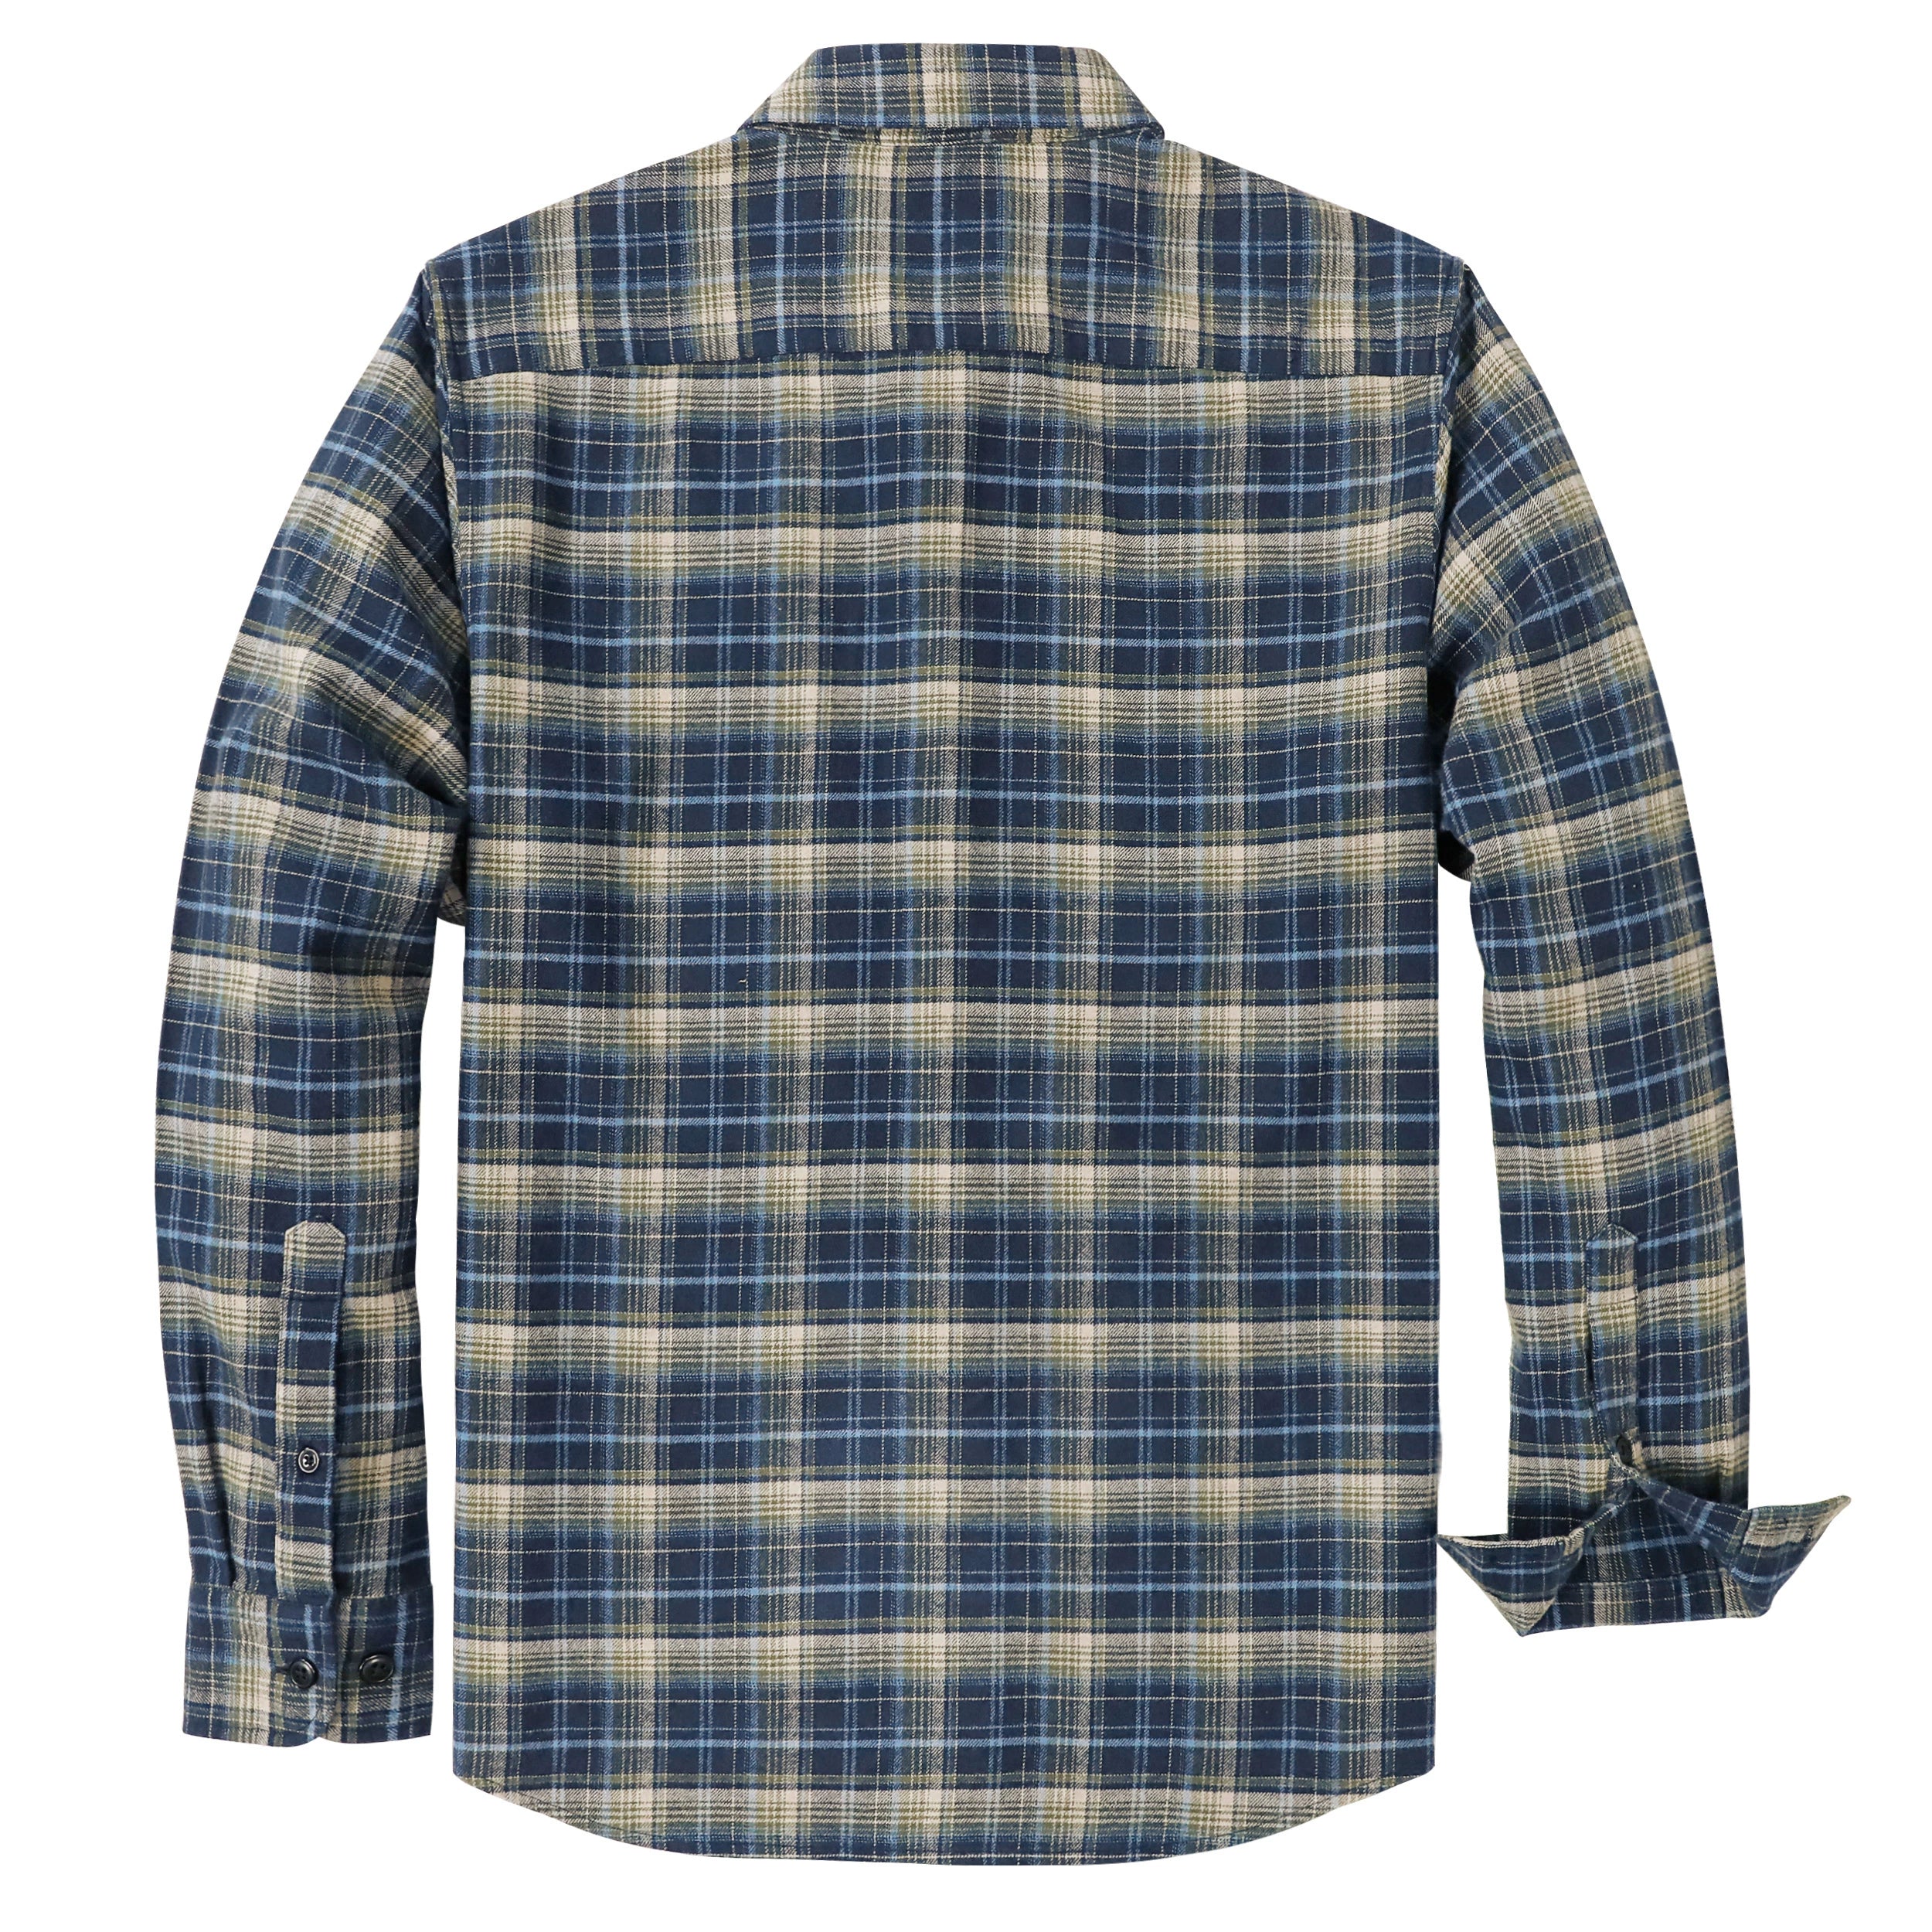 Dubinik® Mens Flannel Shirts Long Sleeve Button Down Casual Work Plaid Shirt Men All Cotton Soft with Pocket Regular Fit#03-048